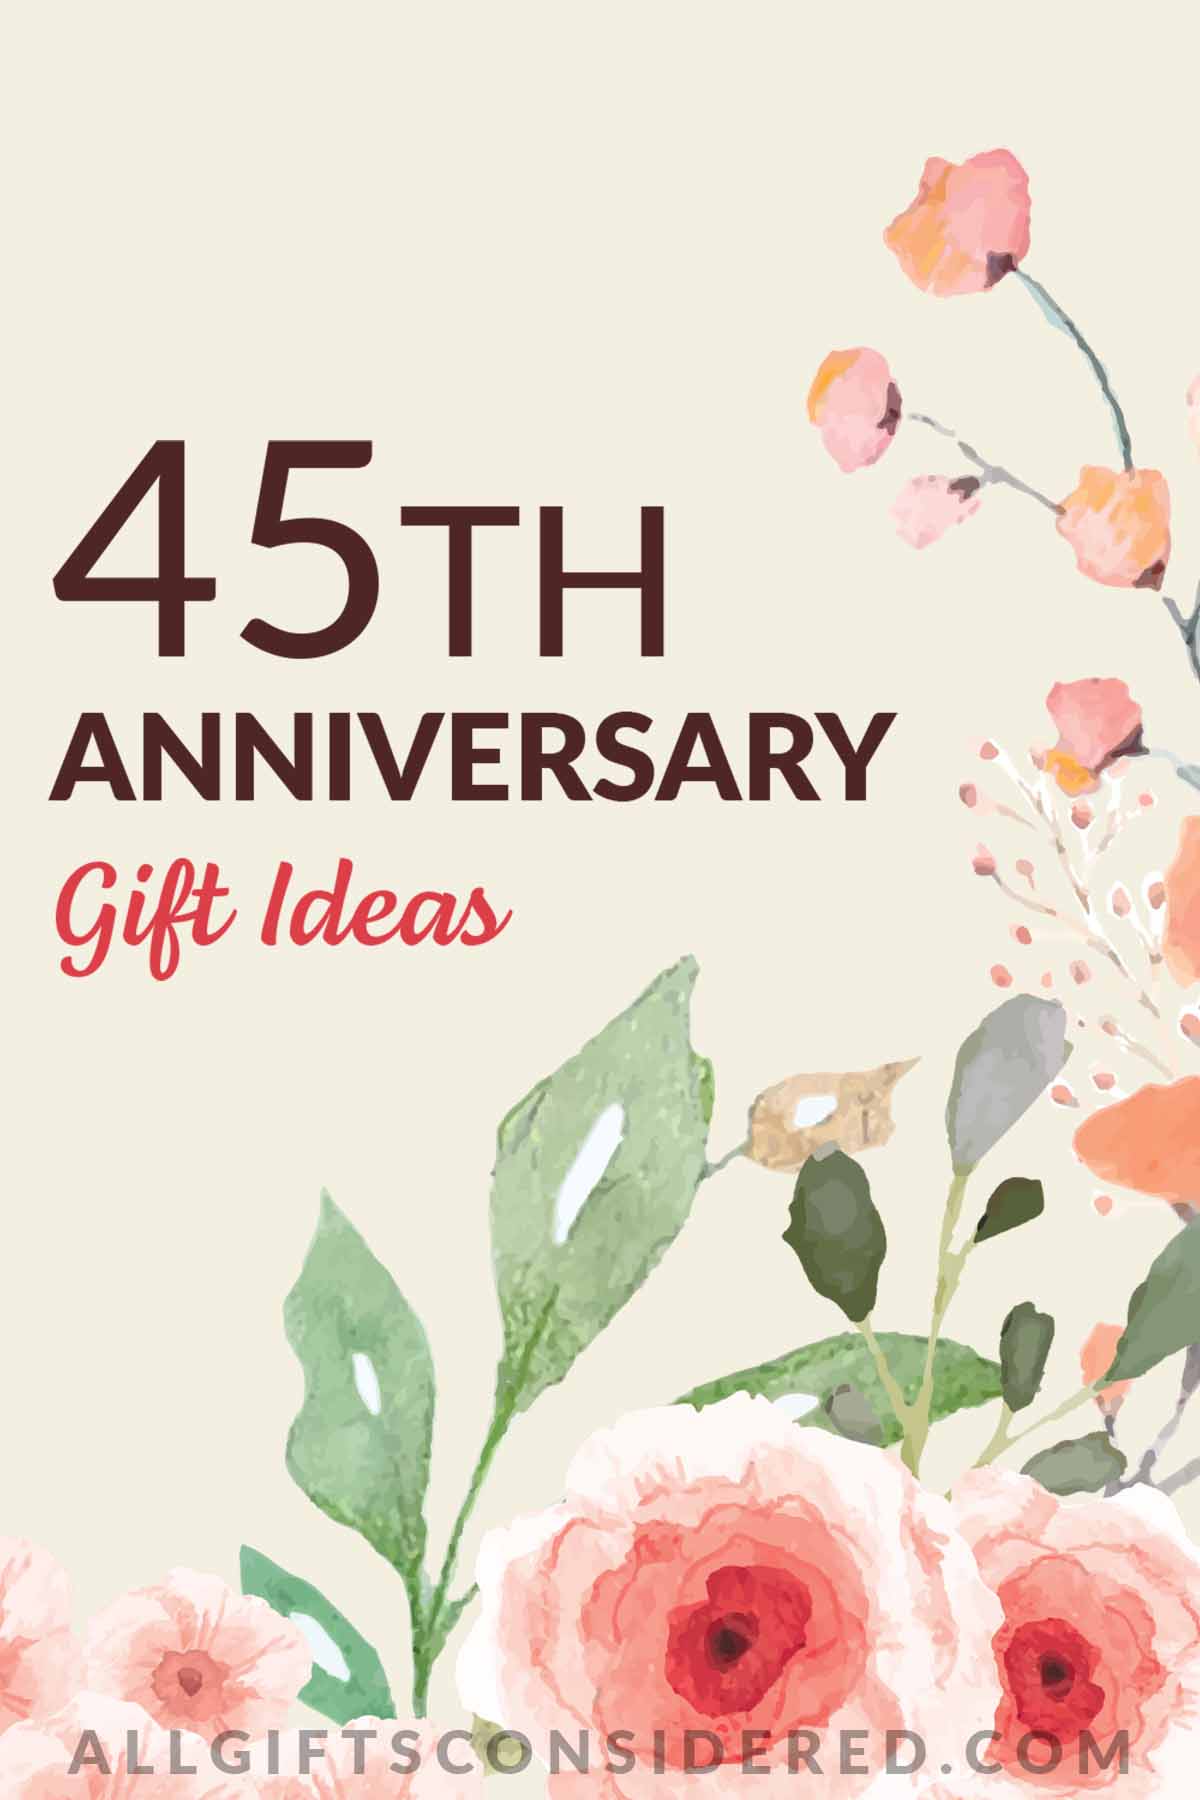 45th Anniversary Gifts: Pin It Image